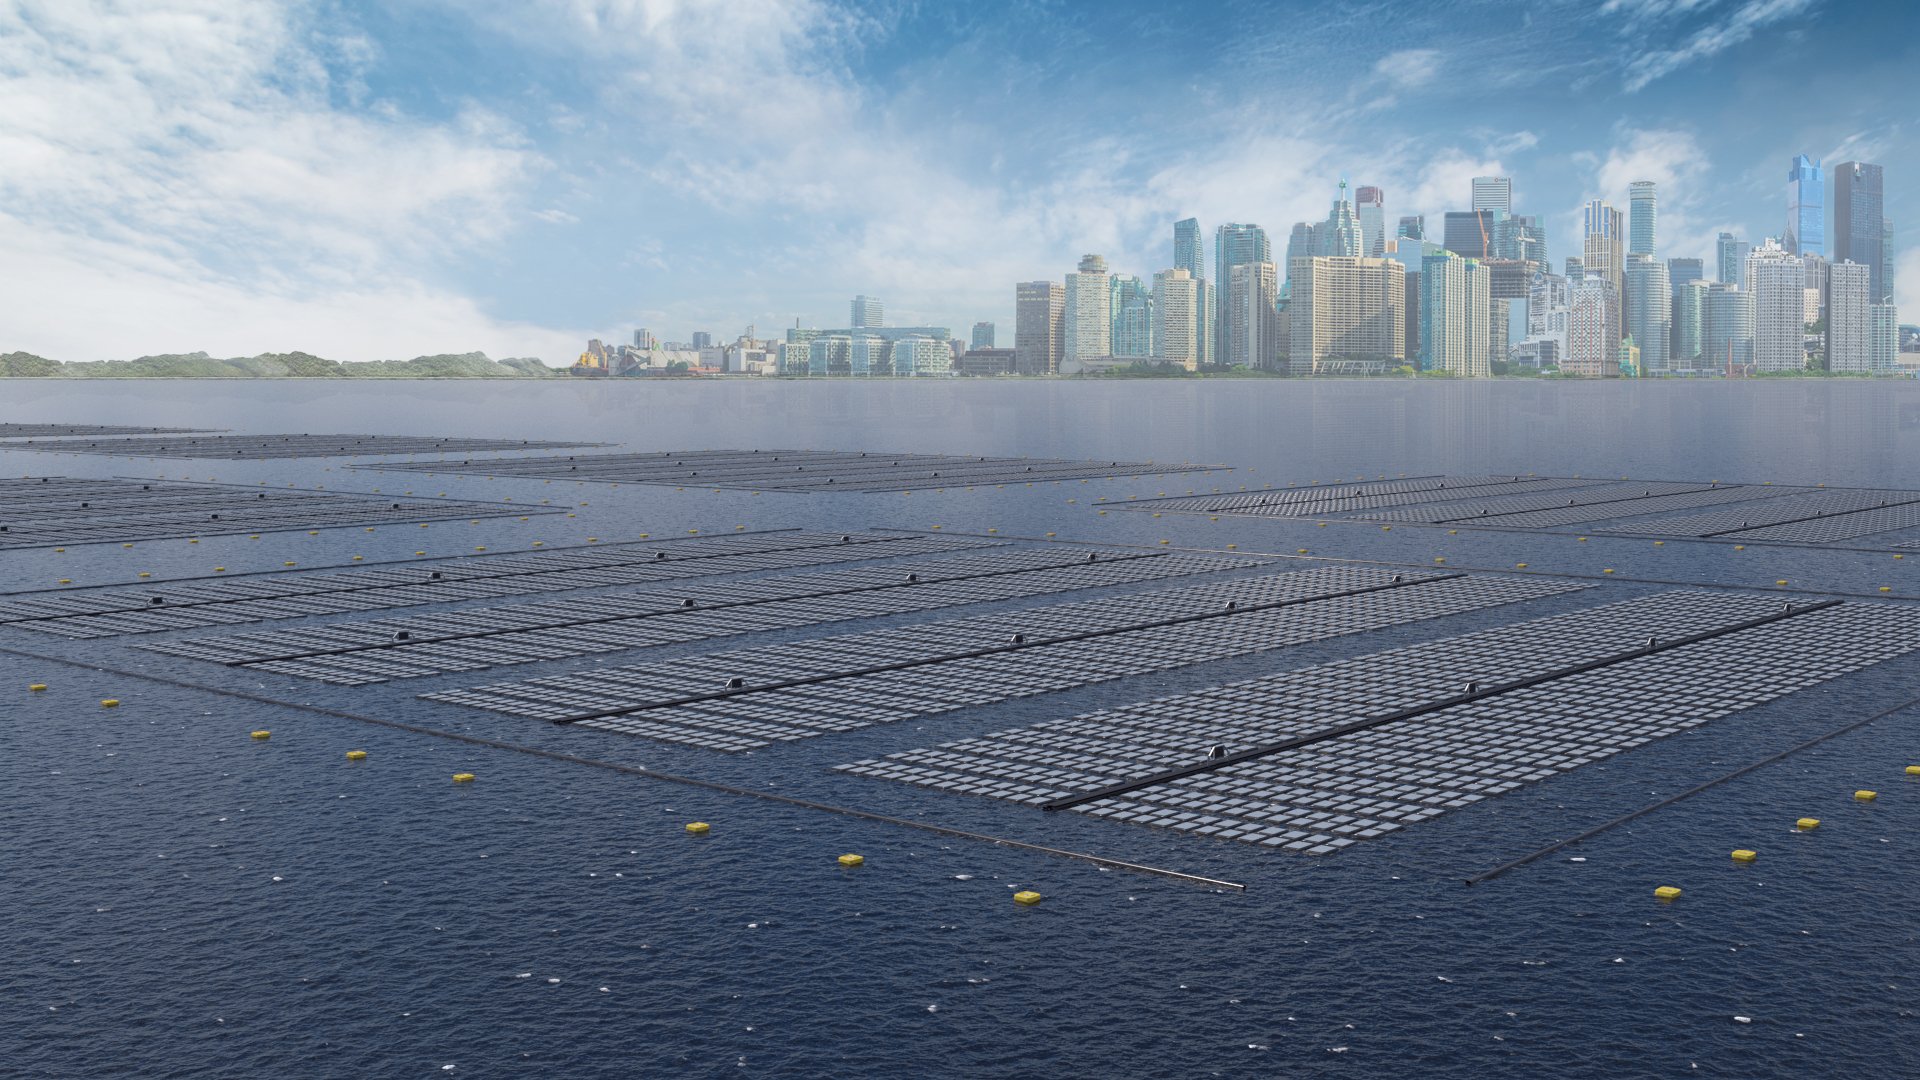 Fred. Olsen 1848's new solution targets near- and offshore floating solar